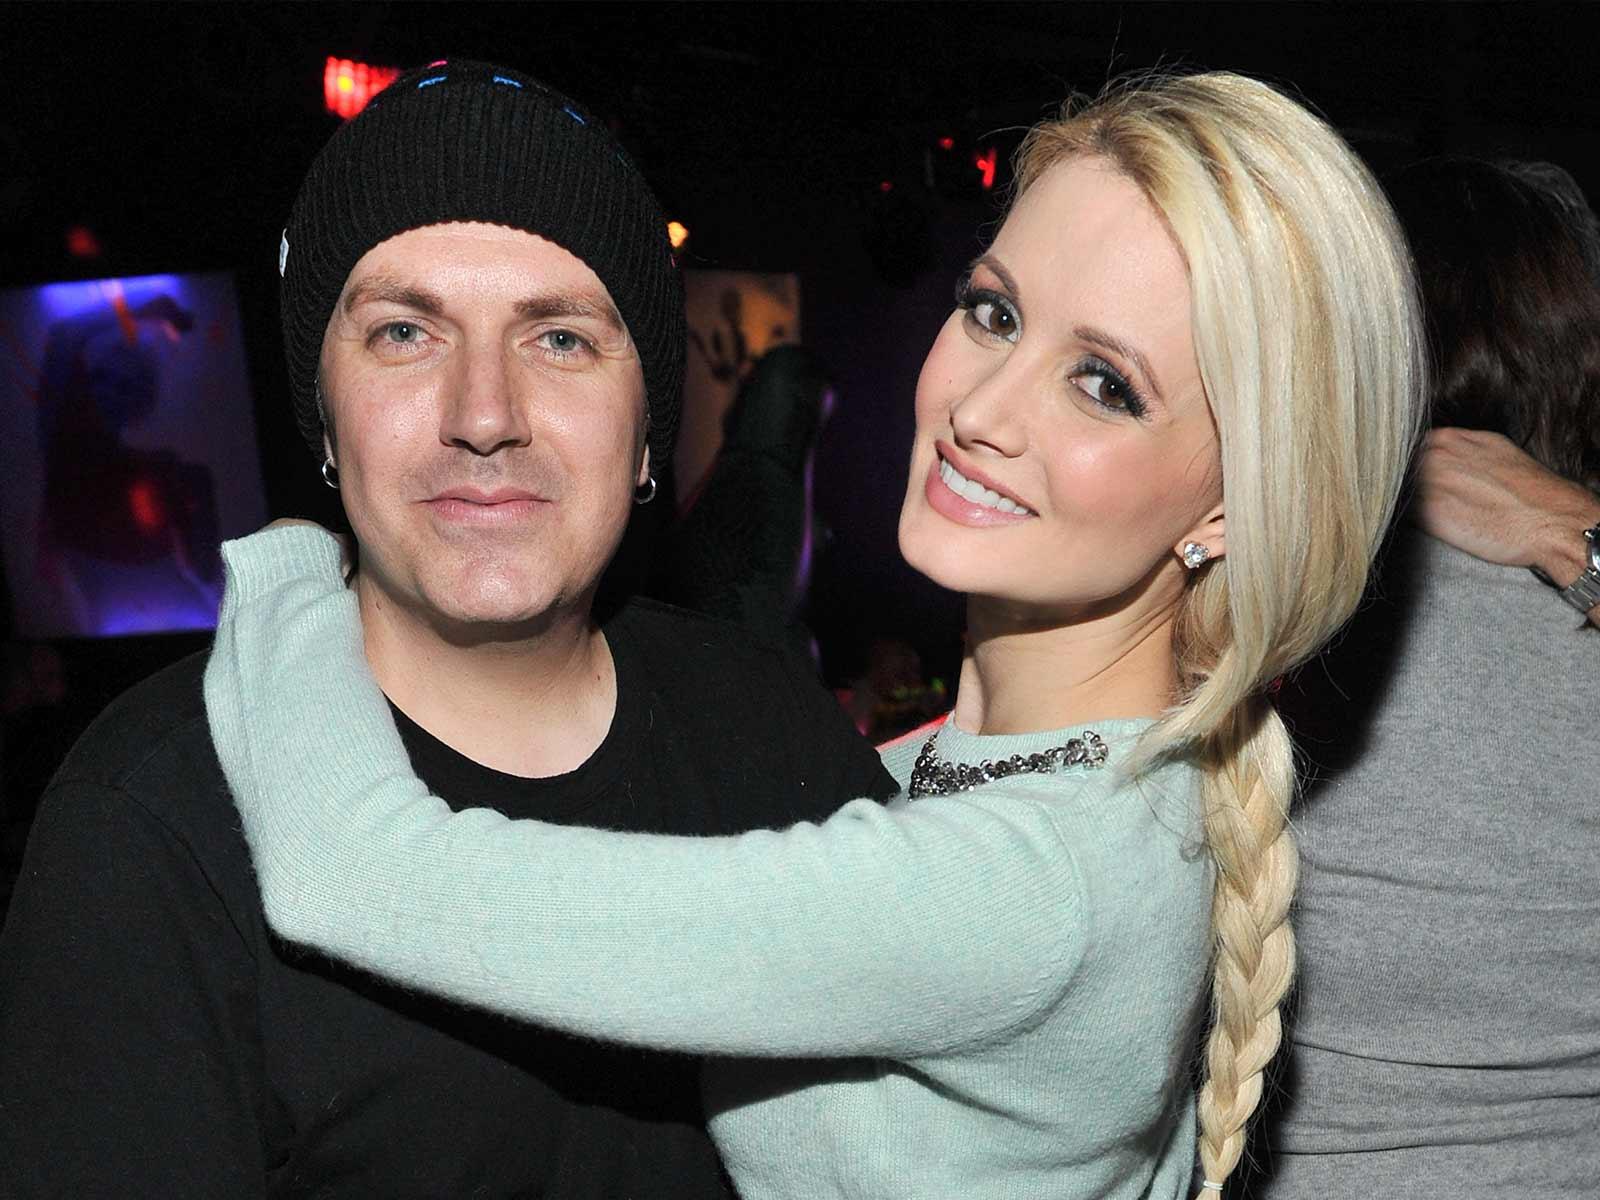 Holly Madison’s Husband Filed for Divorce, Playboy Star Has Already Been Served